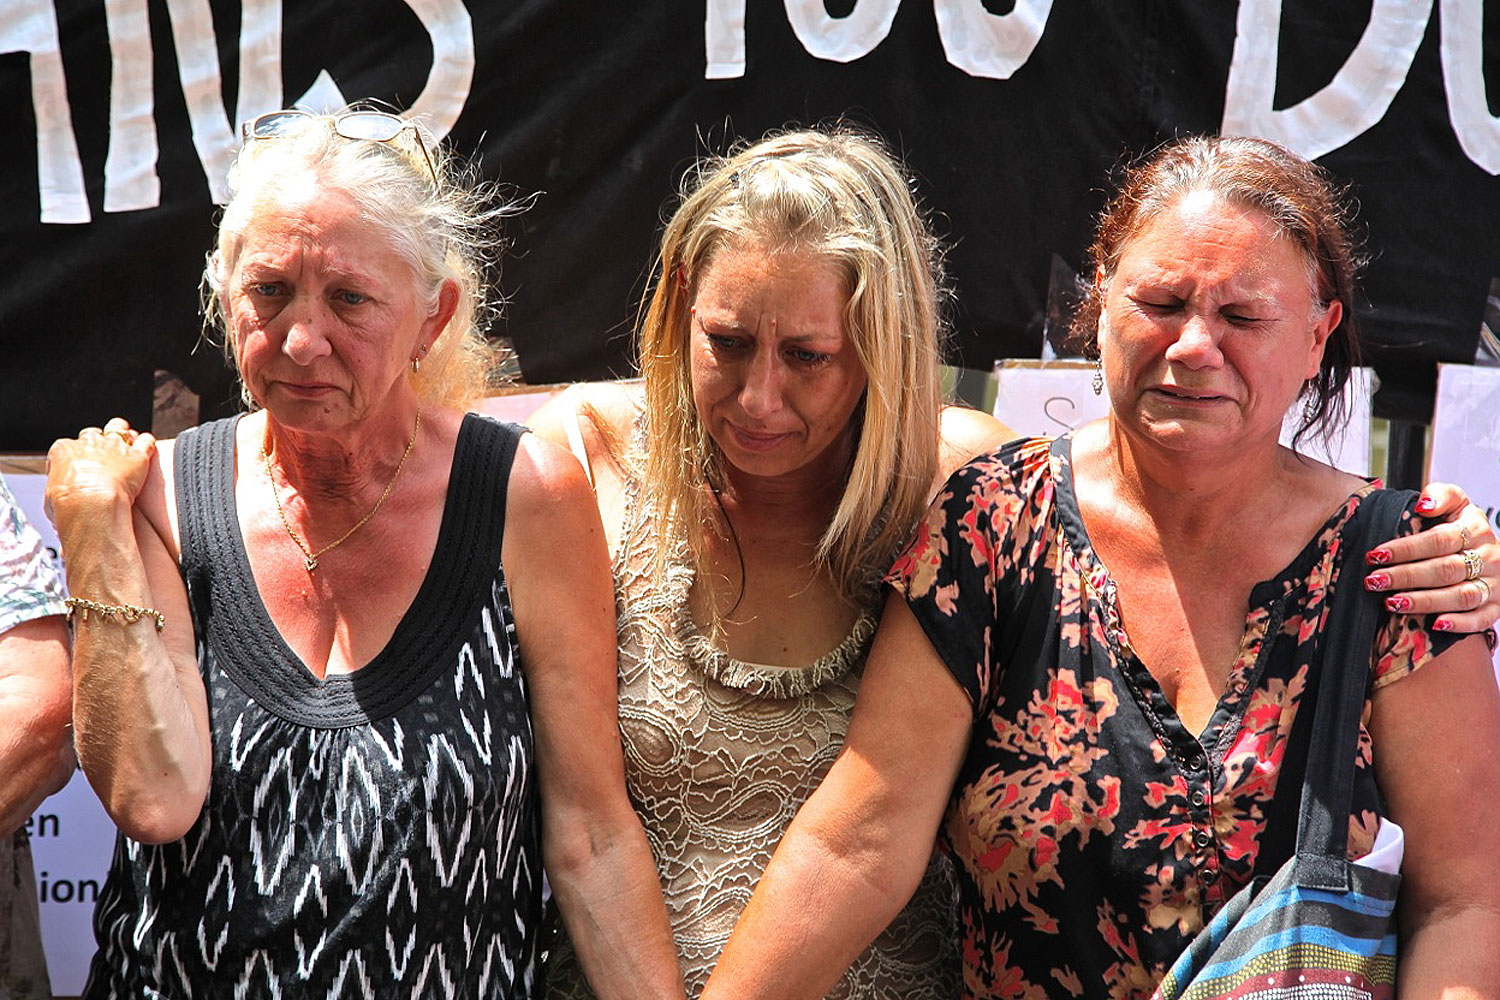 Members of Grandmothers Against Removals protesting against the overrepresentation of indigenous children in the child-protection system on the steps of the parliament house of New South Wales in Sydney on Feb. 13, 2014 (Ian Lloyd Neubauer)